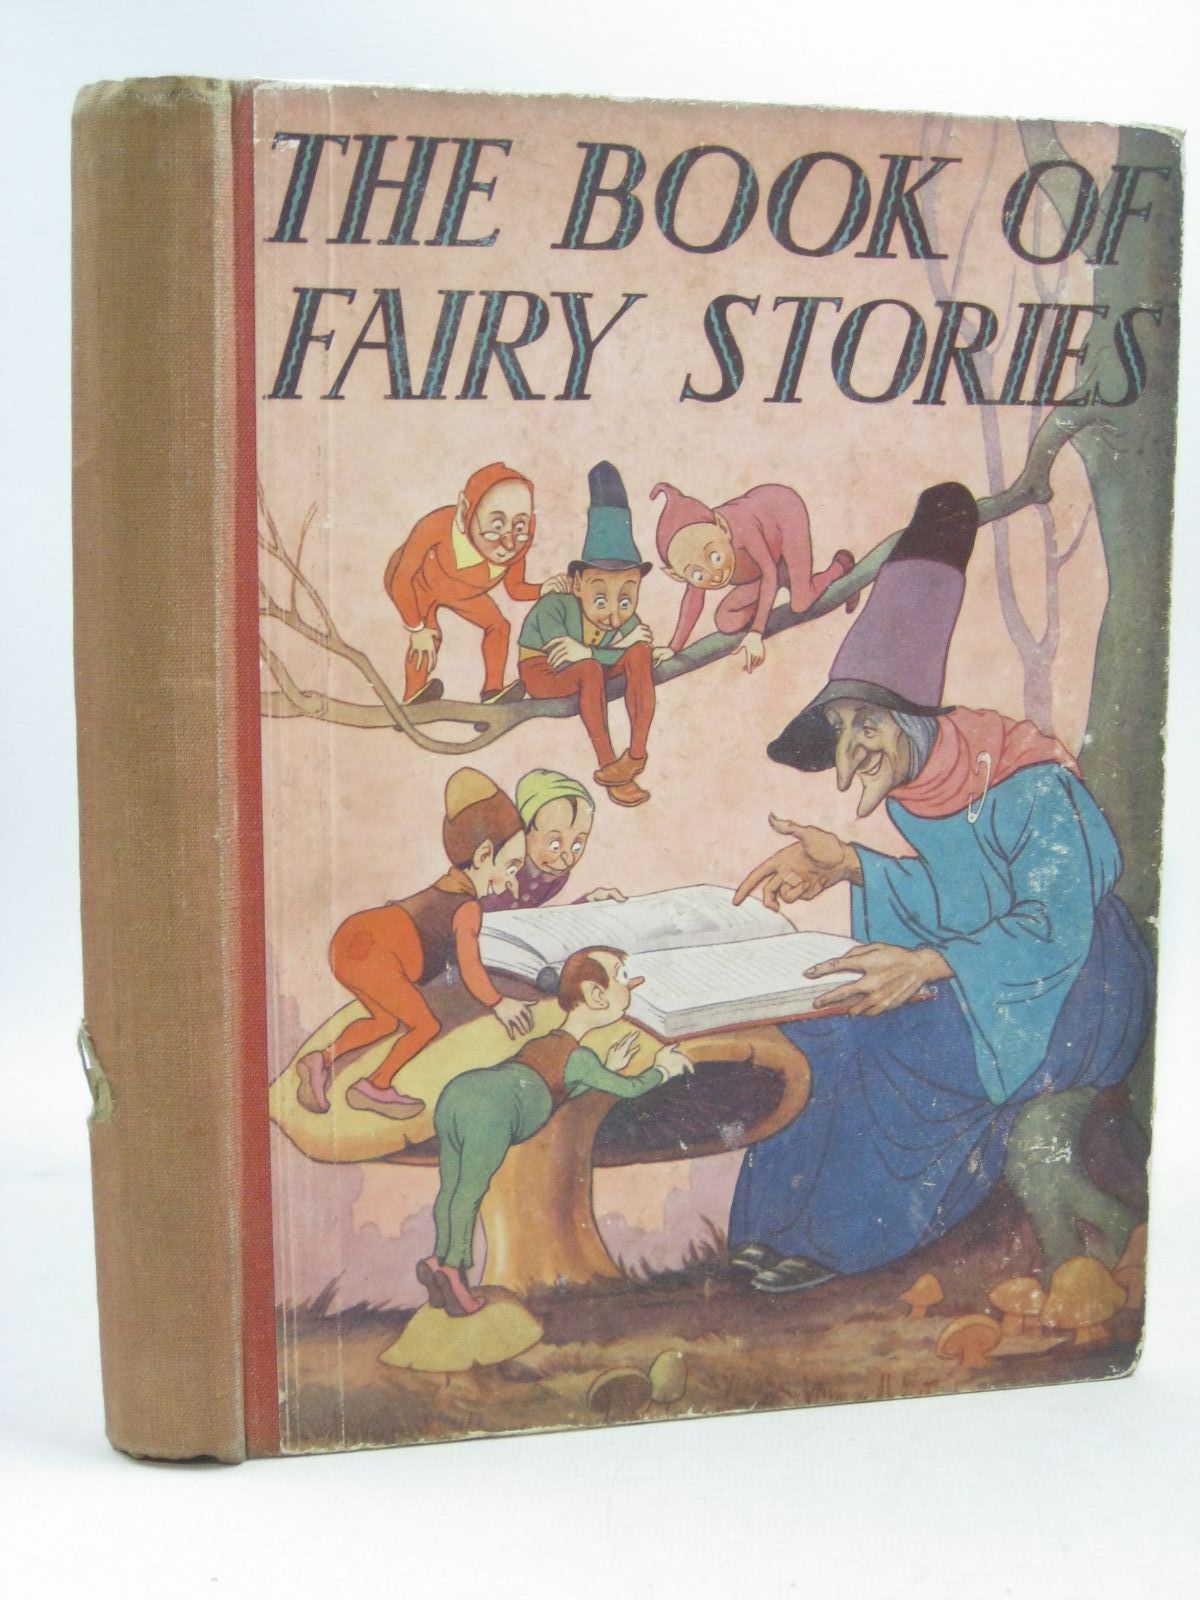 Cover of THE BOOK OF FAIRY STORIES by Marjory Bruce